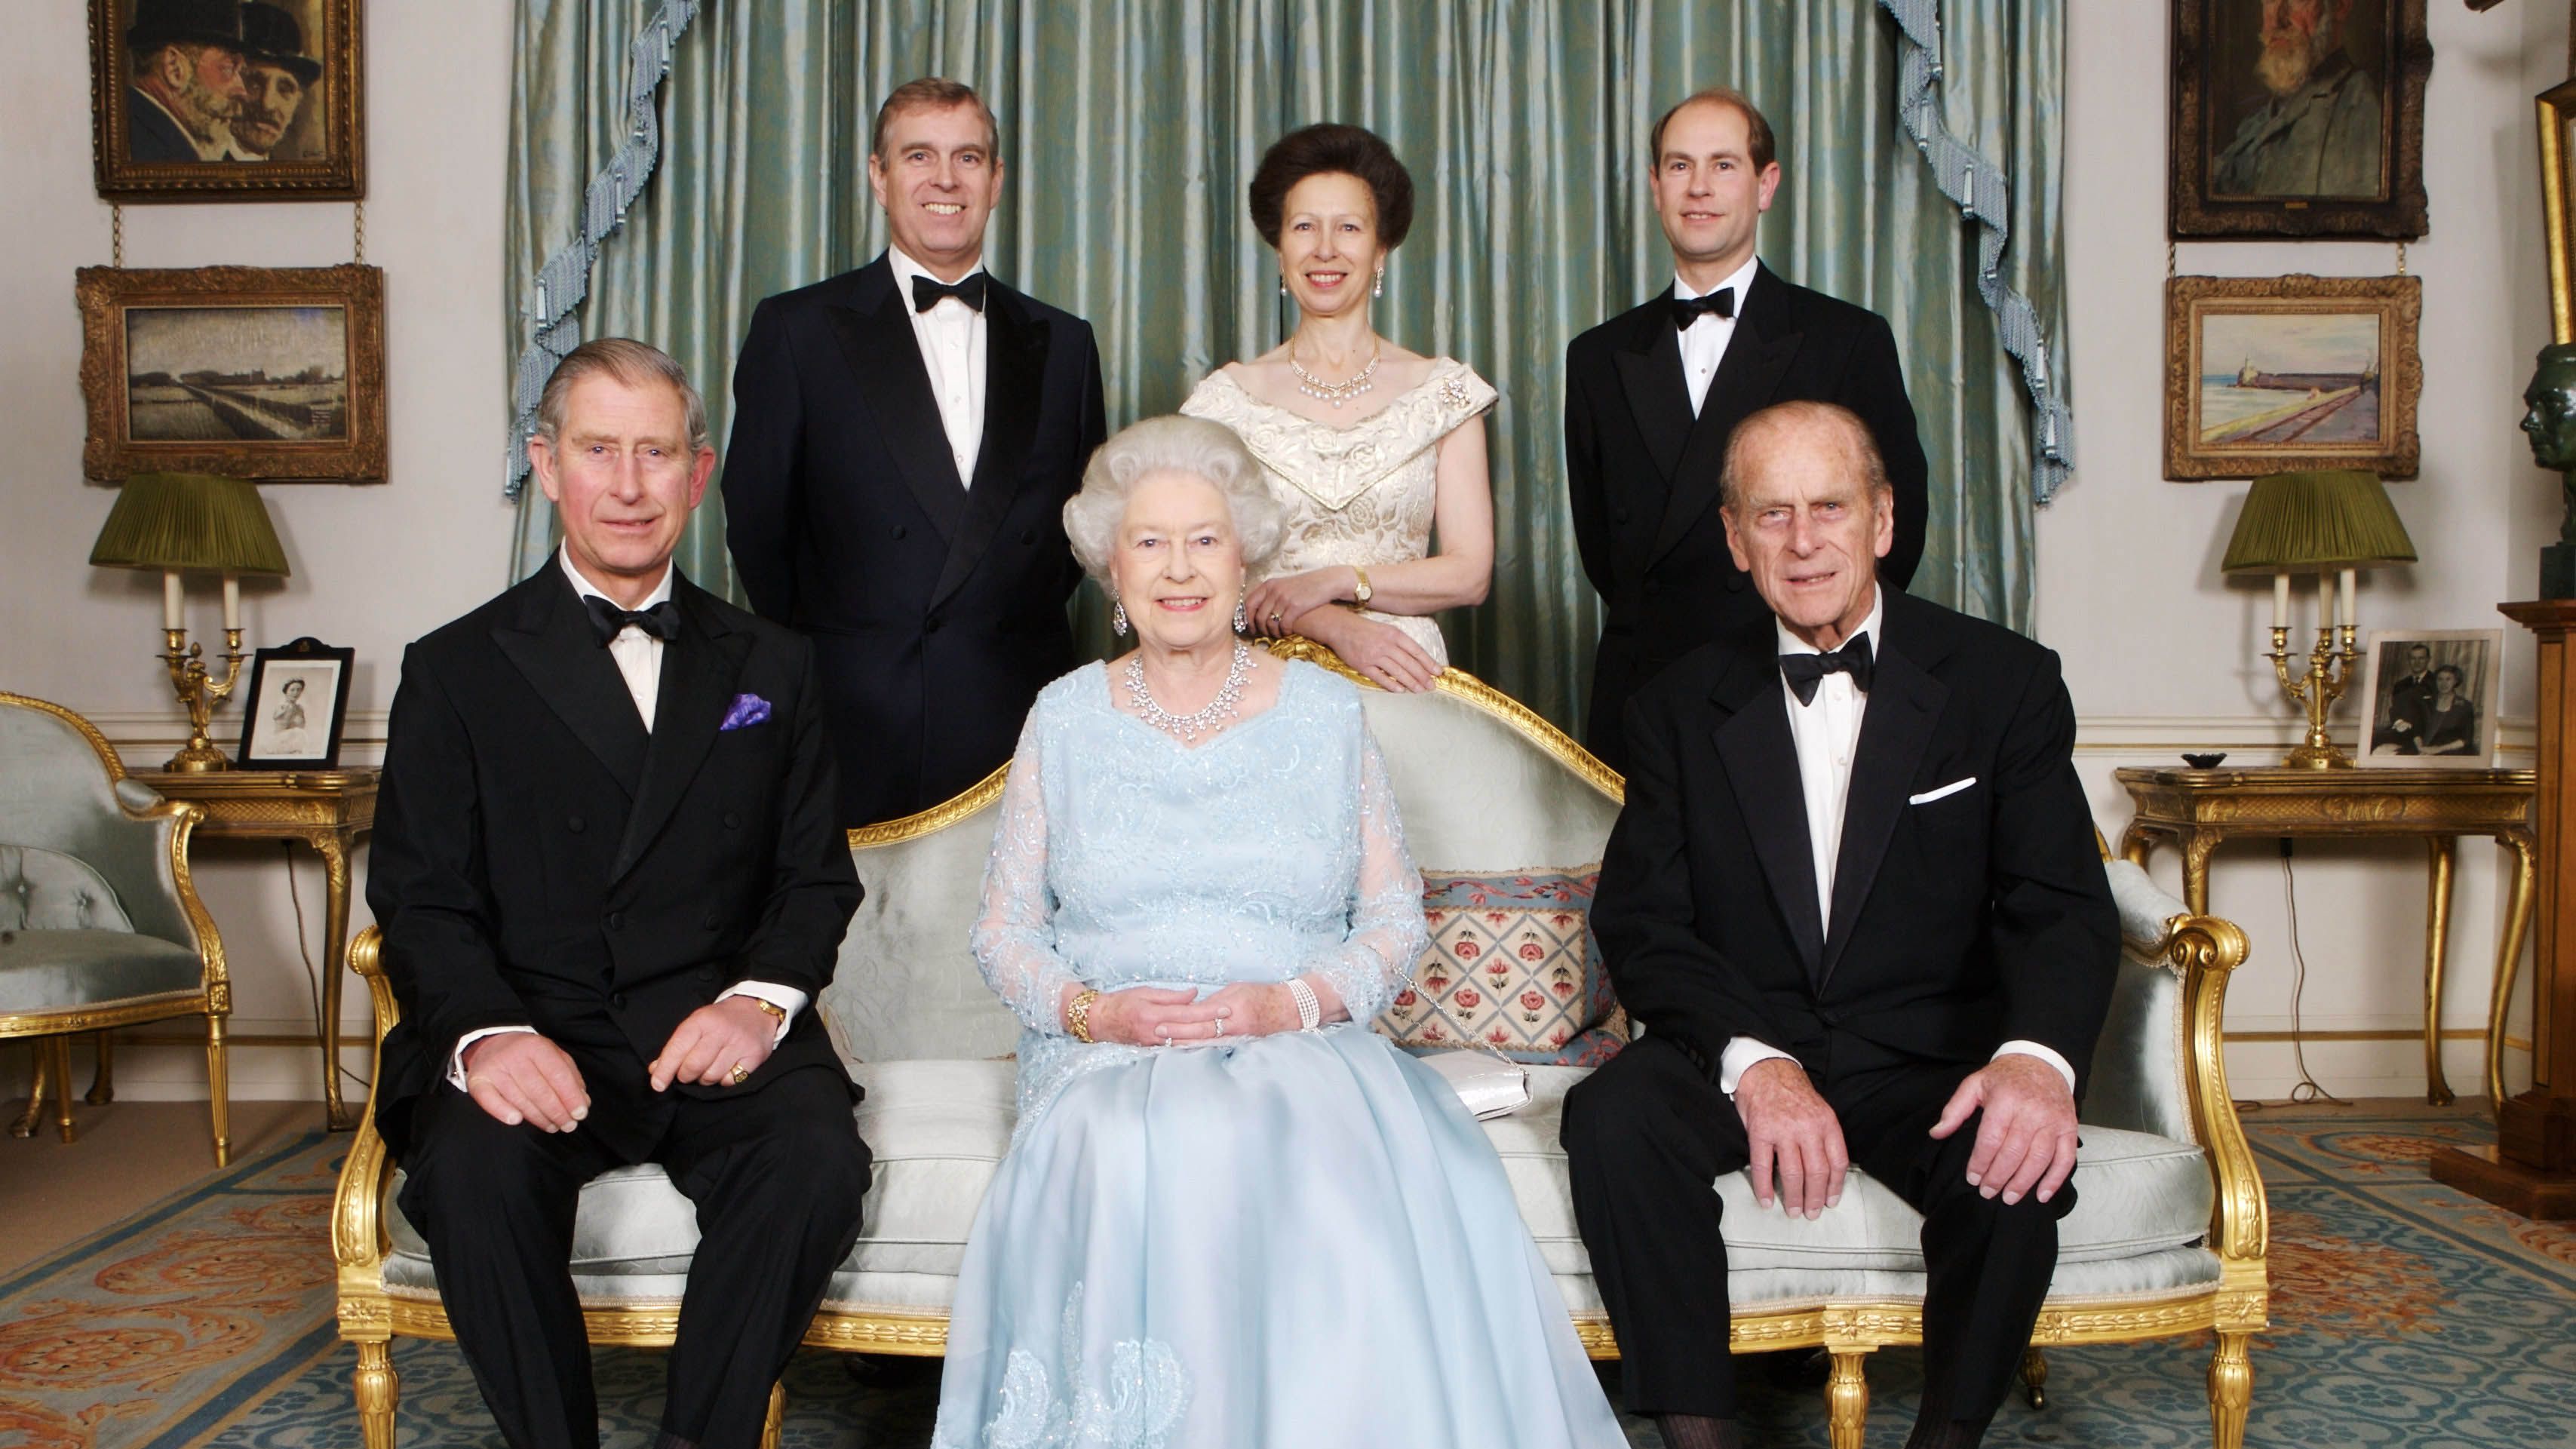 Brother Rape Sister Mp4 Hd - Queen Elizabeth II's Children: All About The Royals' Relationships